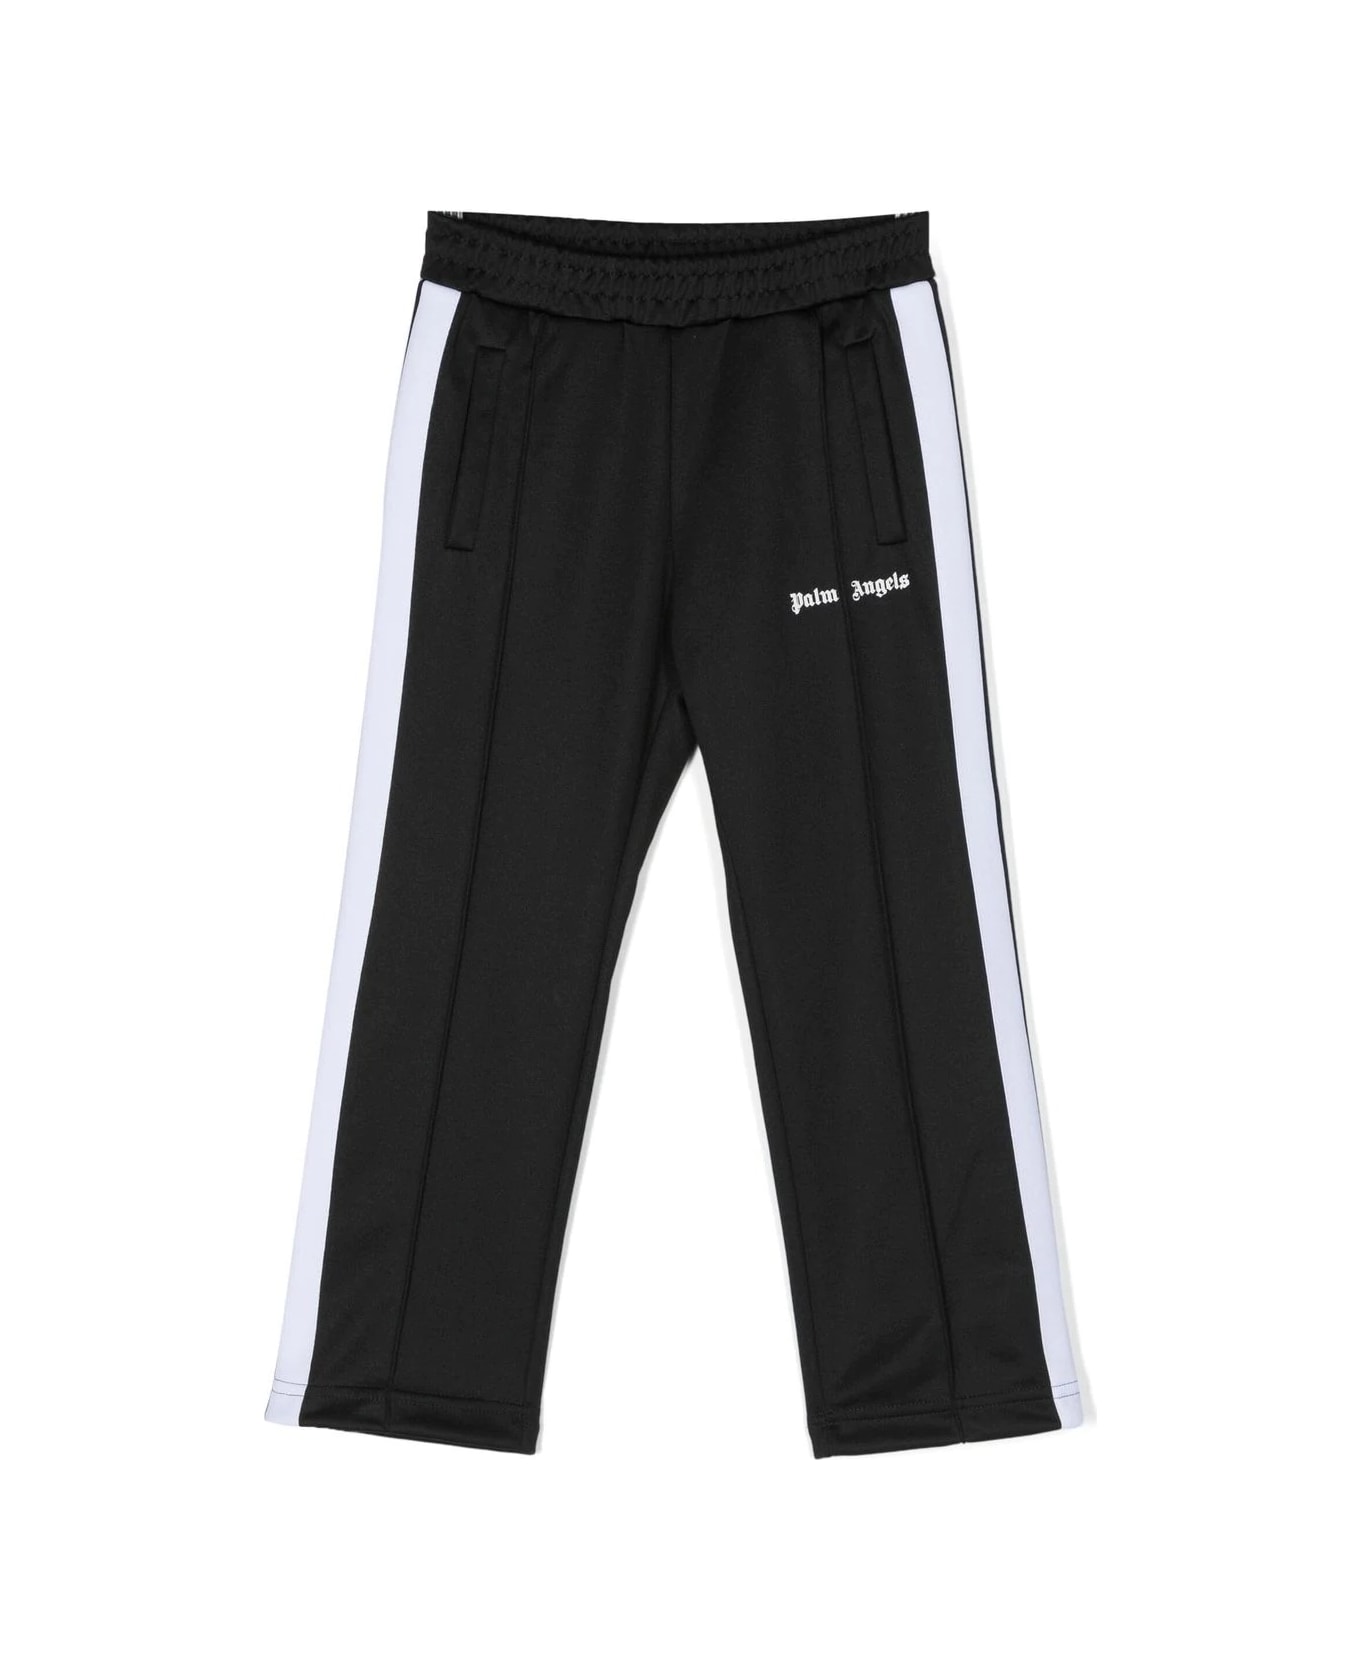 Palm Angels Black Track Trousers With Logo - Black ボトムス